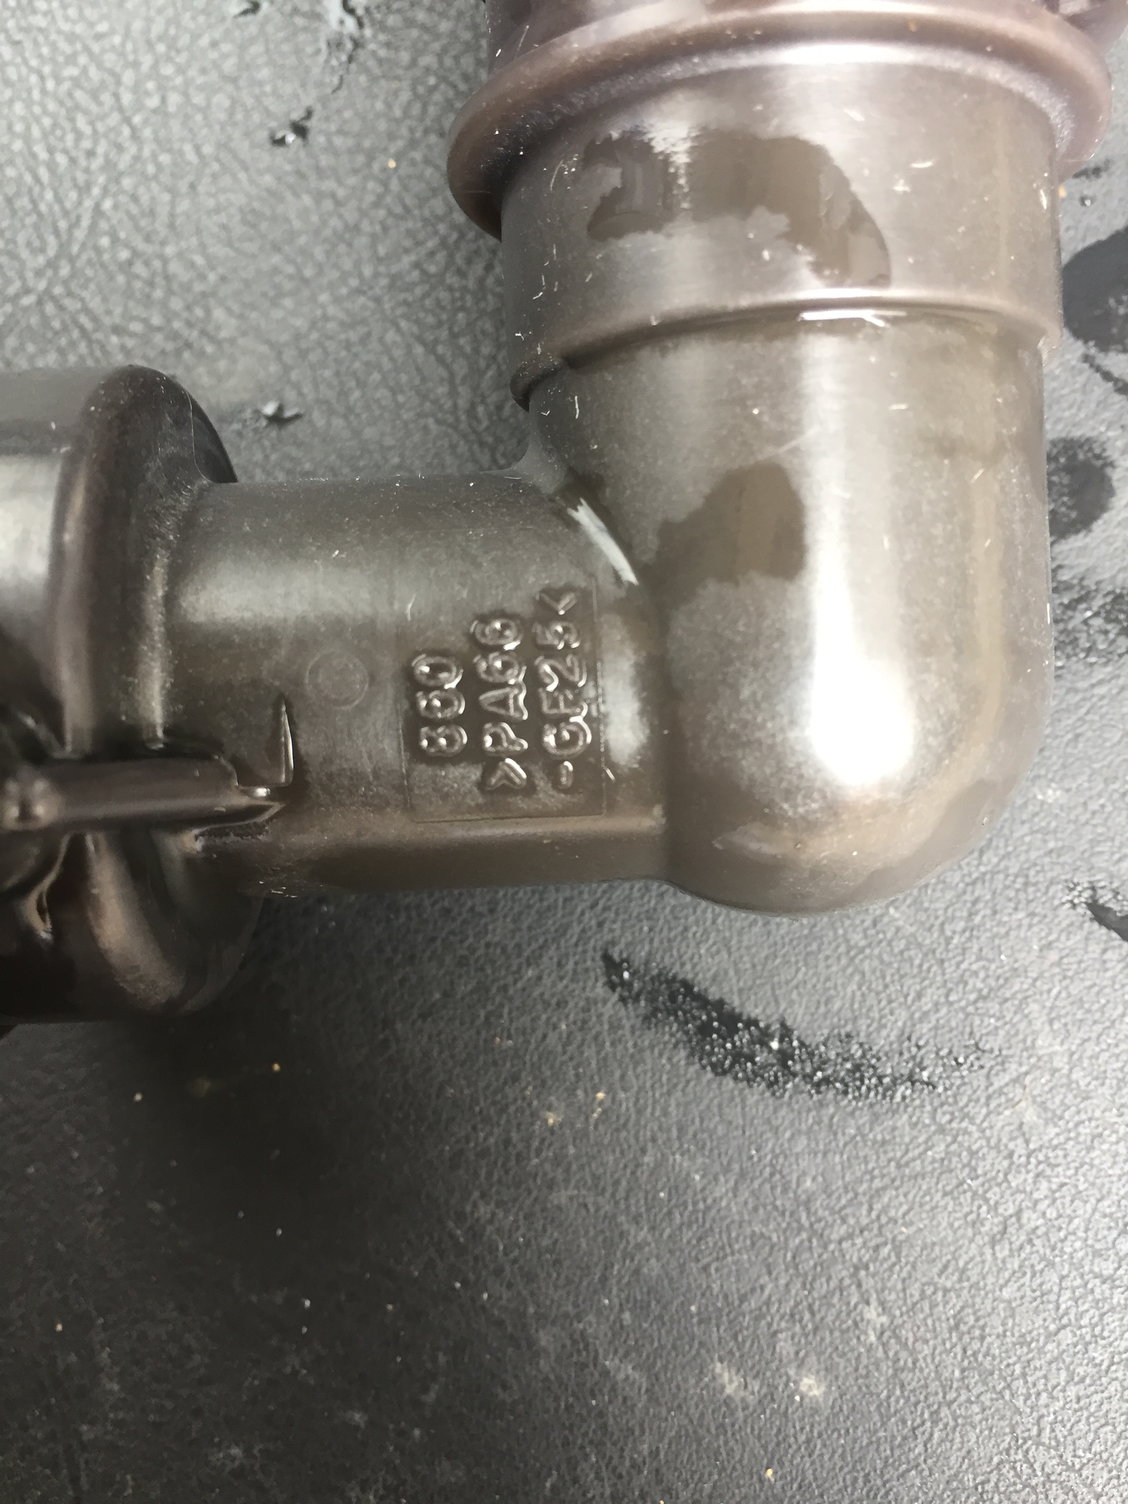 Radiator coolant filler neck leak - is this coupling a factory part